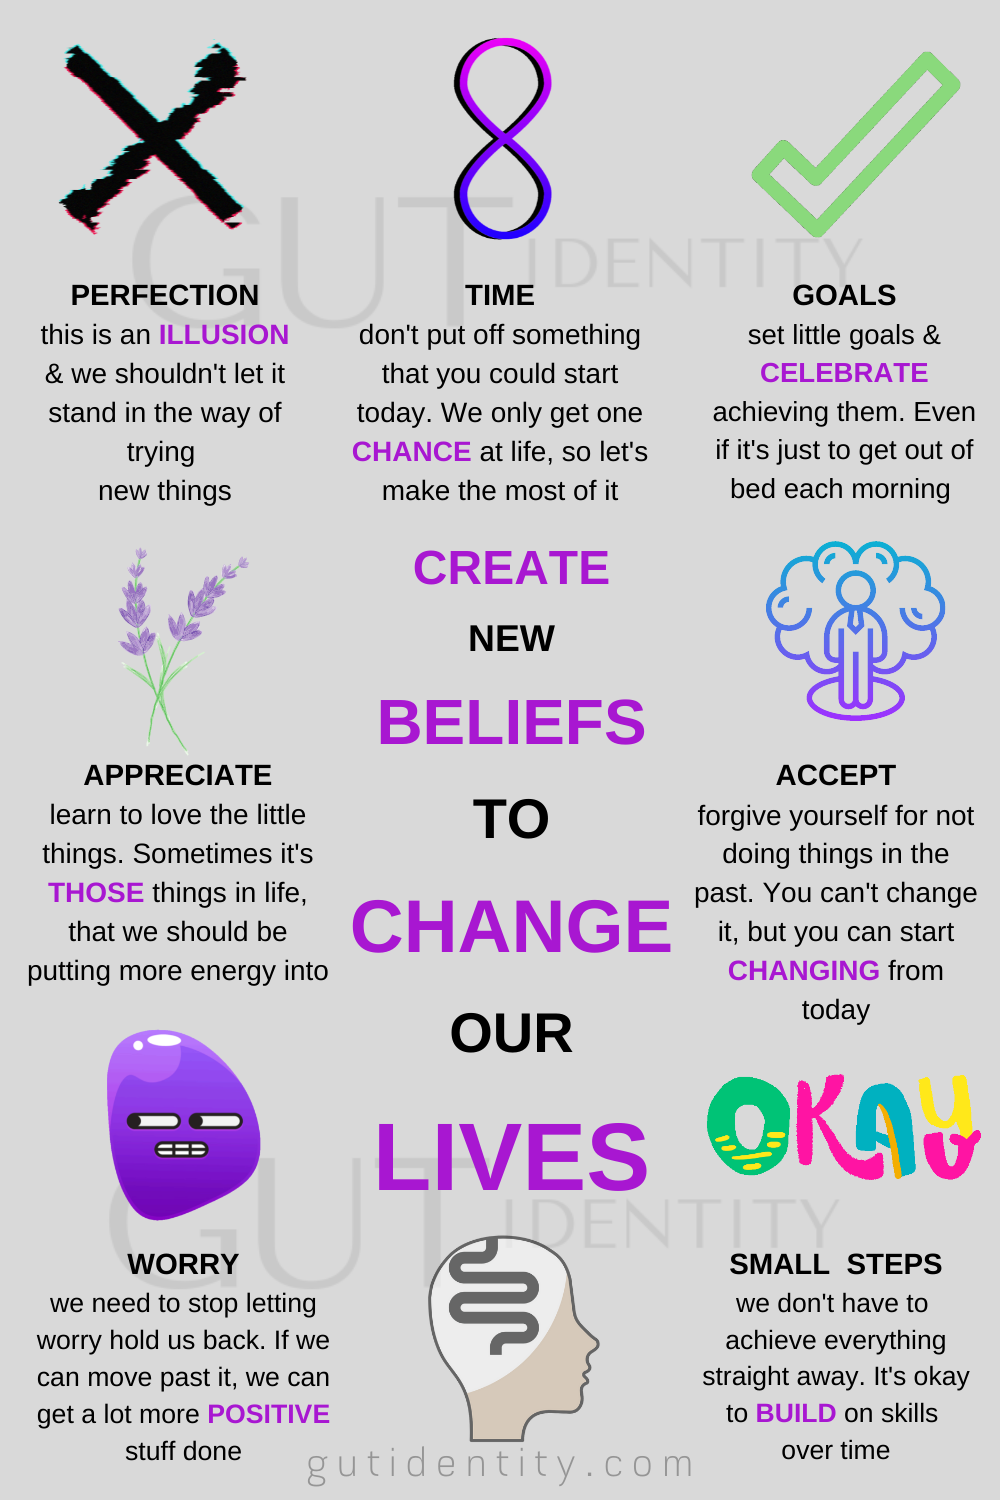 Create New Beliefs to Change Our Lives by Gutidentity